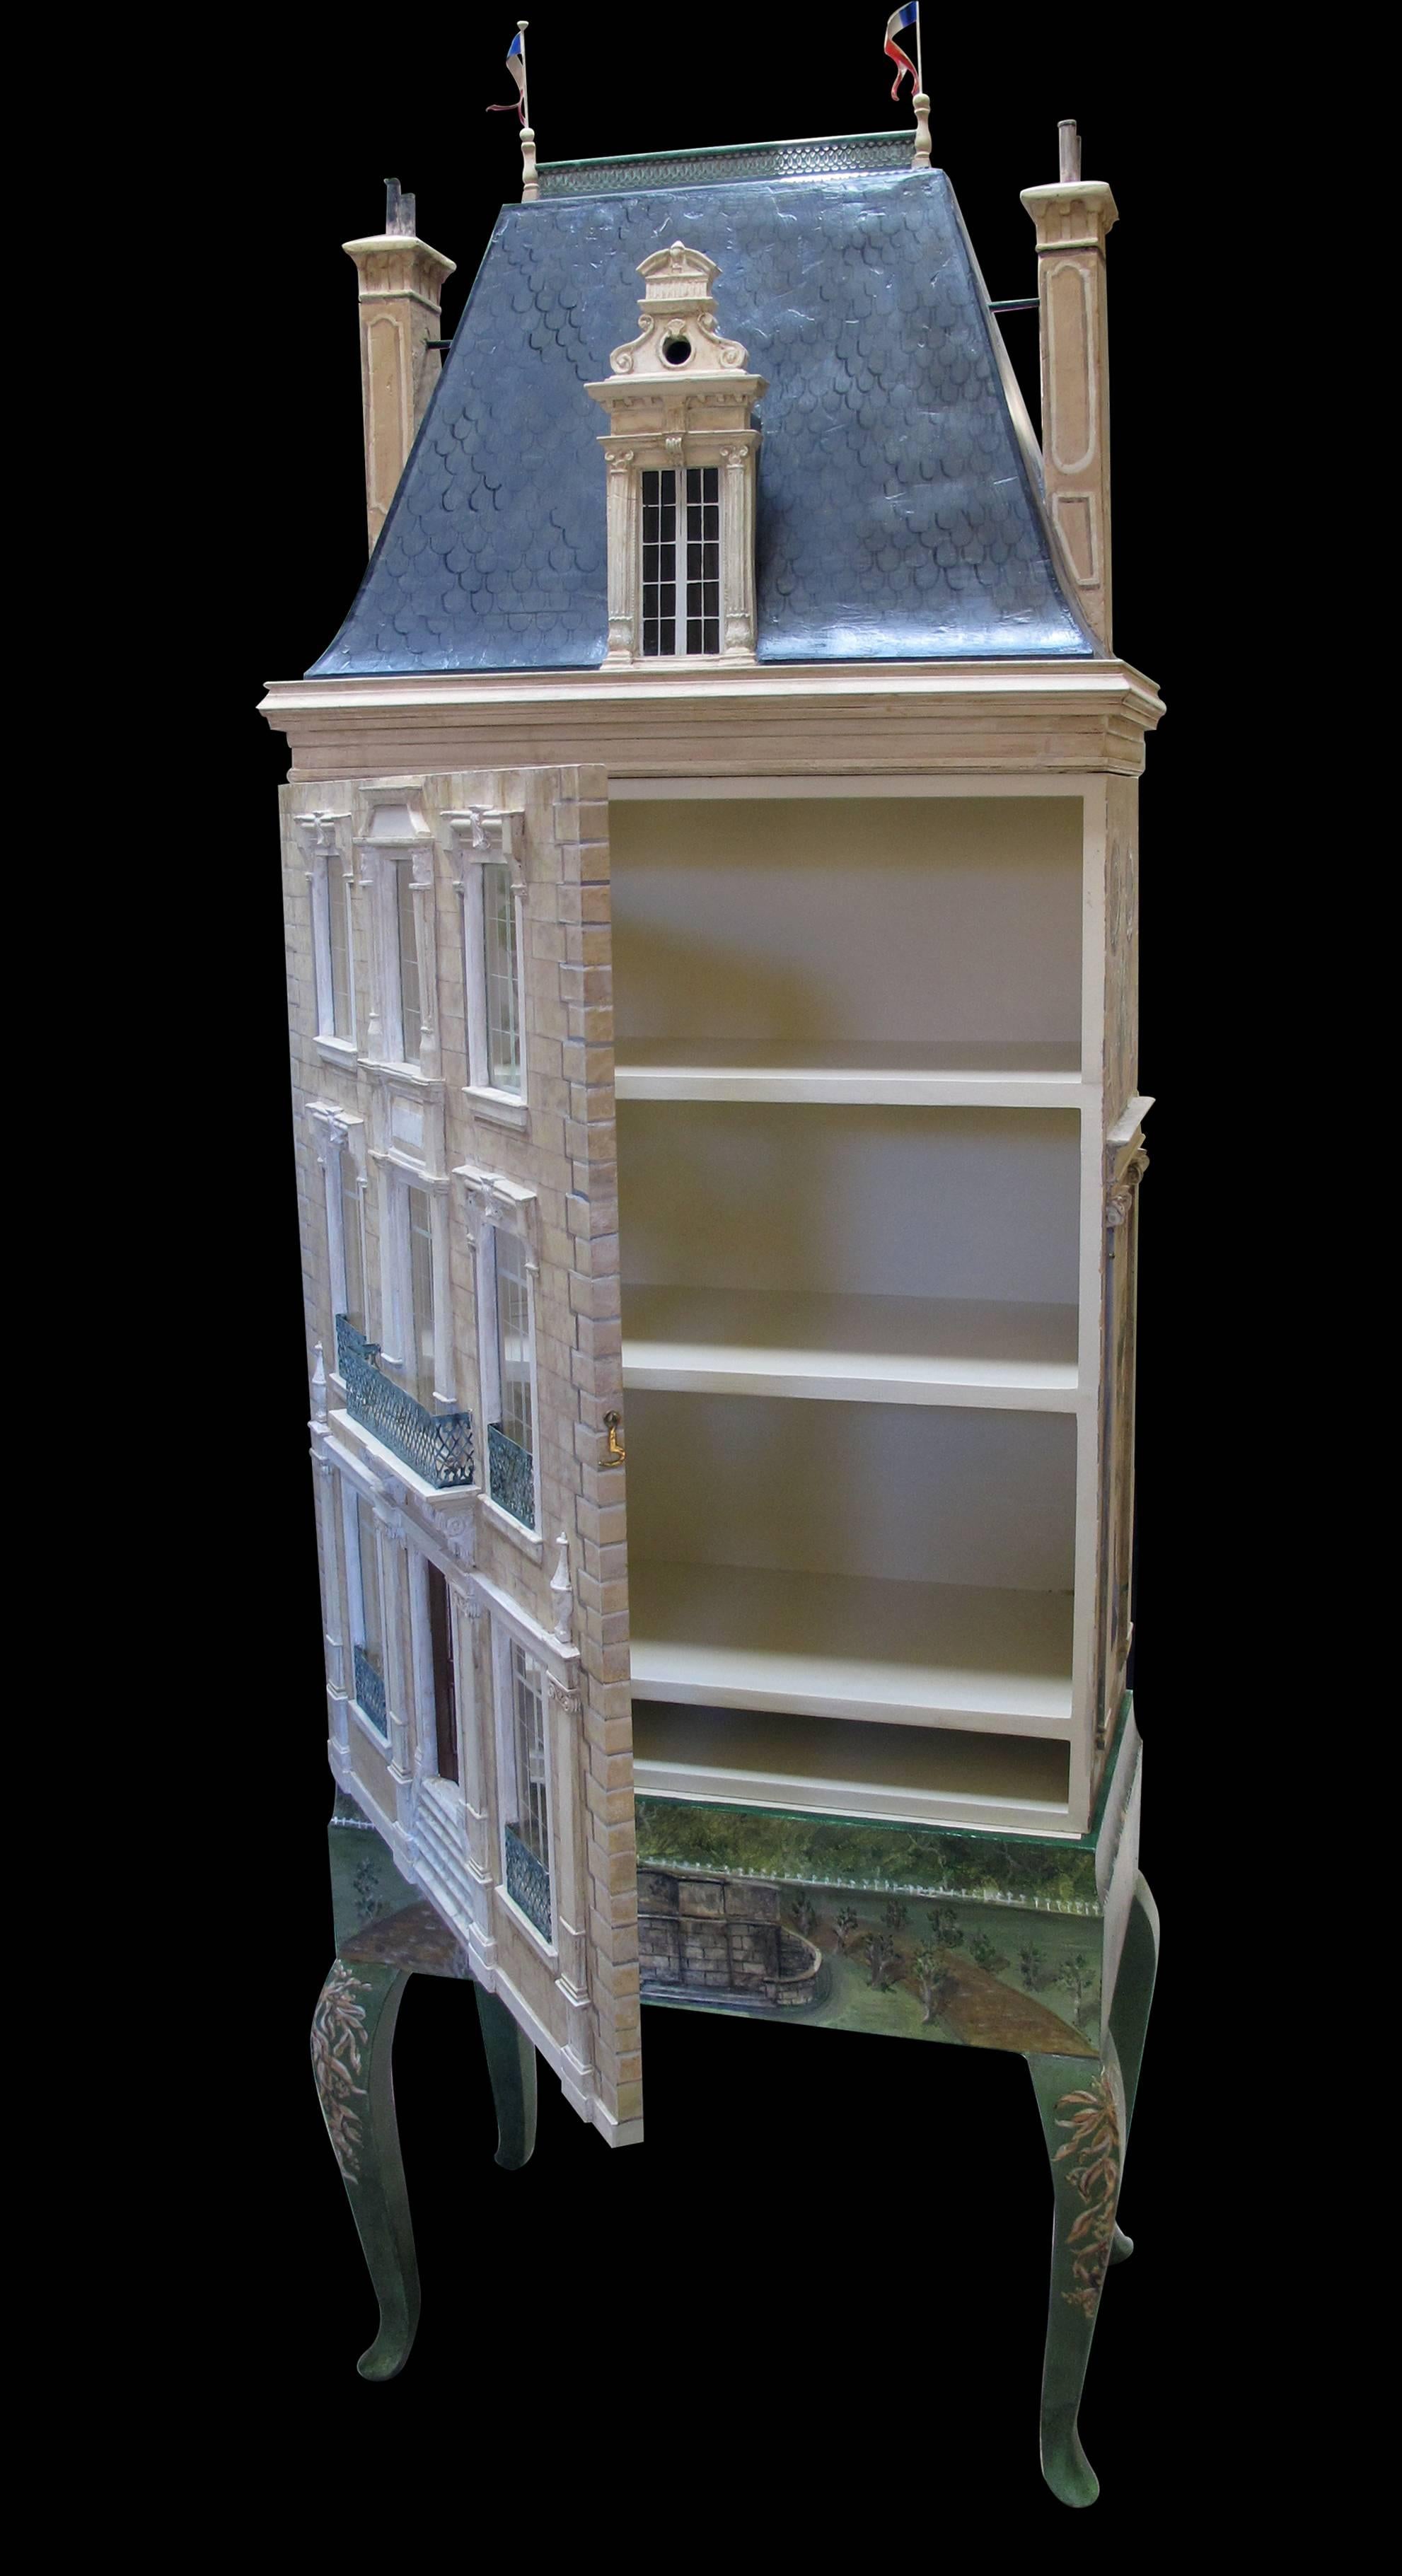 A rare and masterfully crafted wooden hand-painted dollhouse/cabinet of a stately French chateau by famed artisans Eric and Carole Lansdown; the most popular of Eric Lansdown dollhouse designs and the last of its series 'Carole and Eric Lansdown